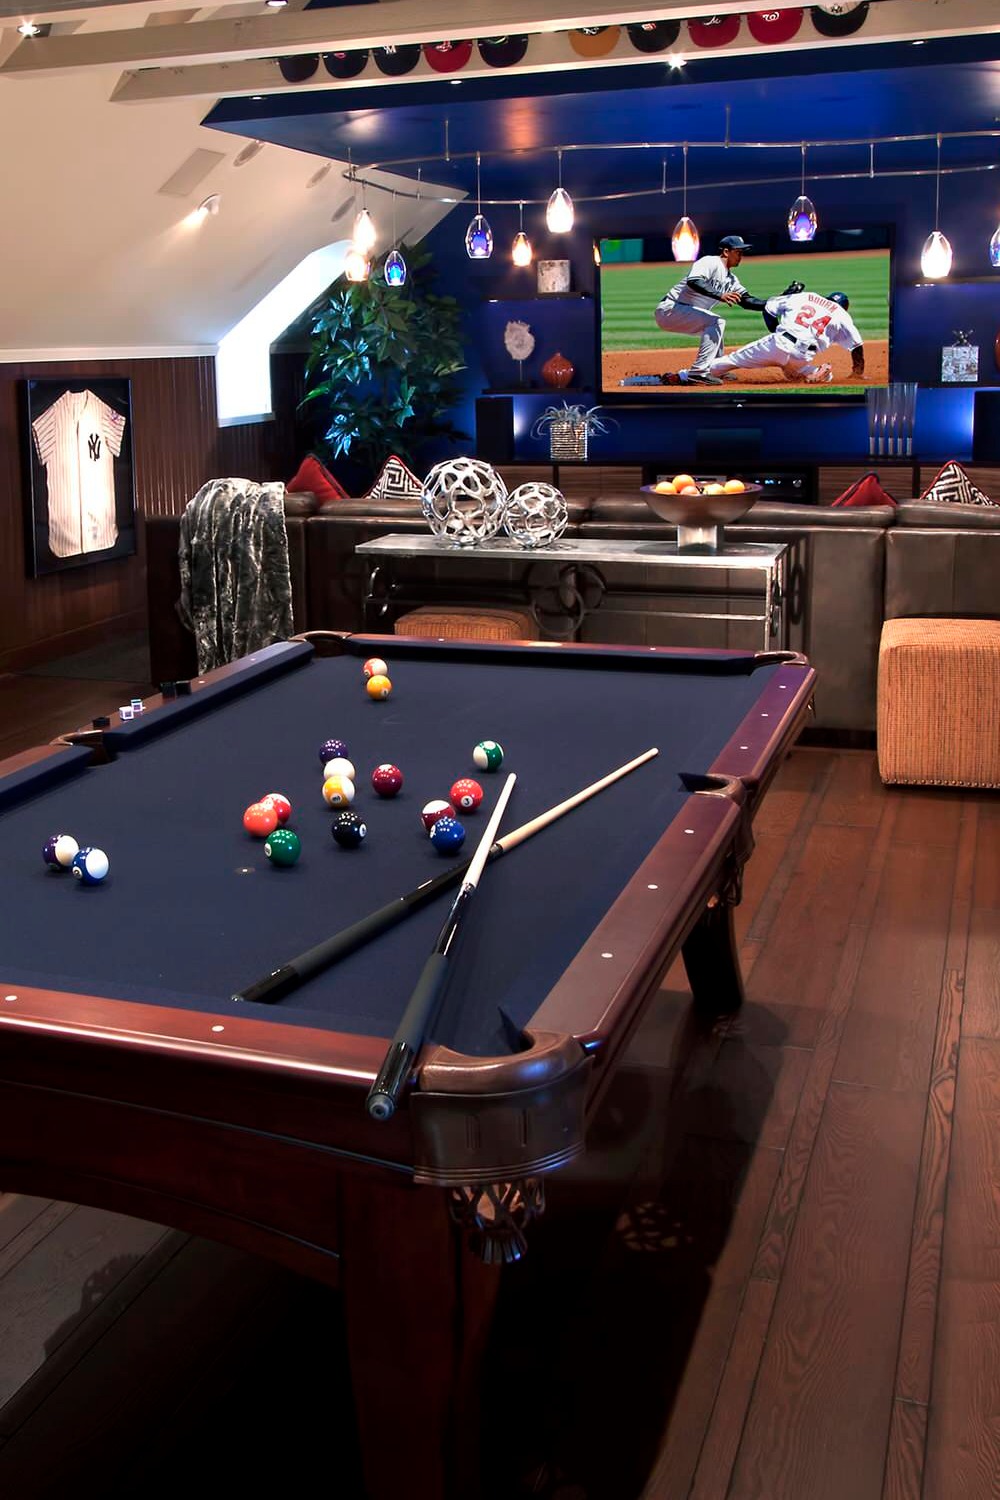 Pool Tables Billiards Table Substantial Drop Down Lighting Table Frame Family Room Space Man Cave Actual Works